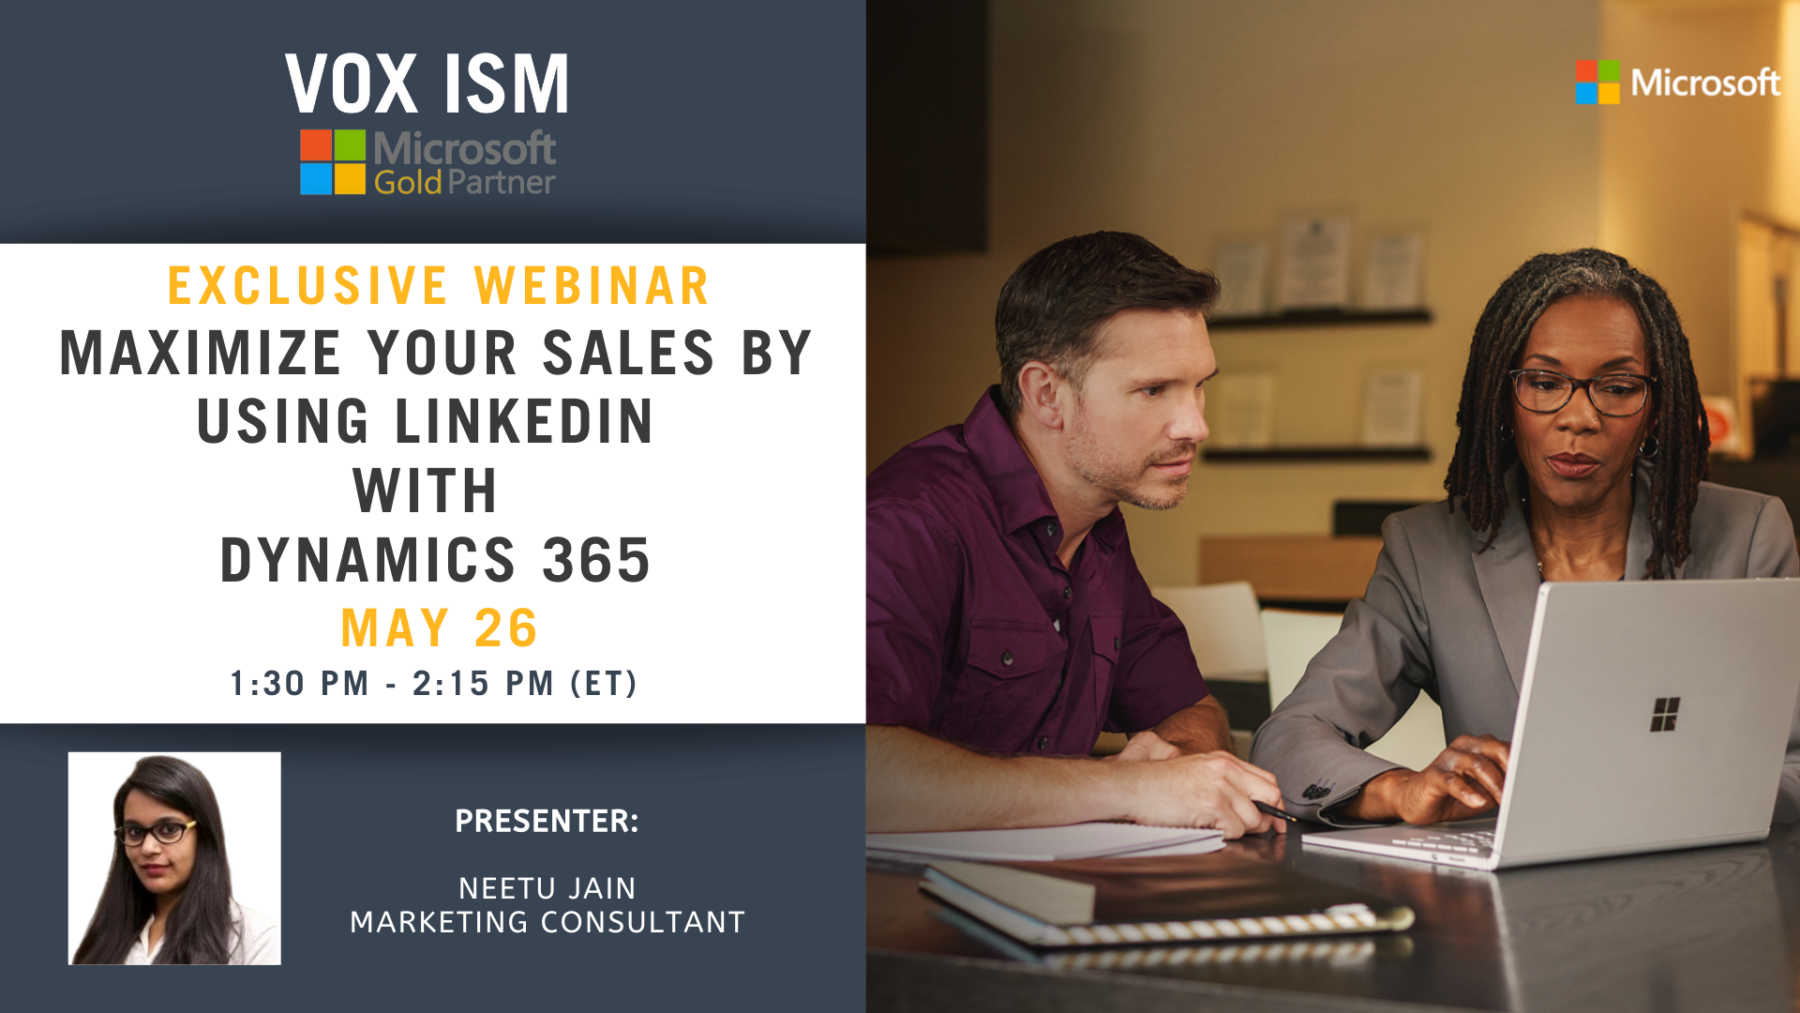 Maximize Your Sales By Using LinkedIn With Dynamics 365 - May 26 - Webinar